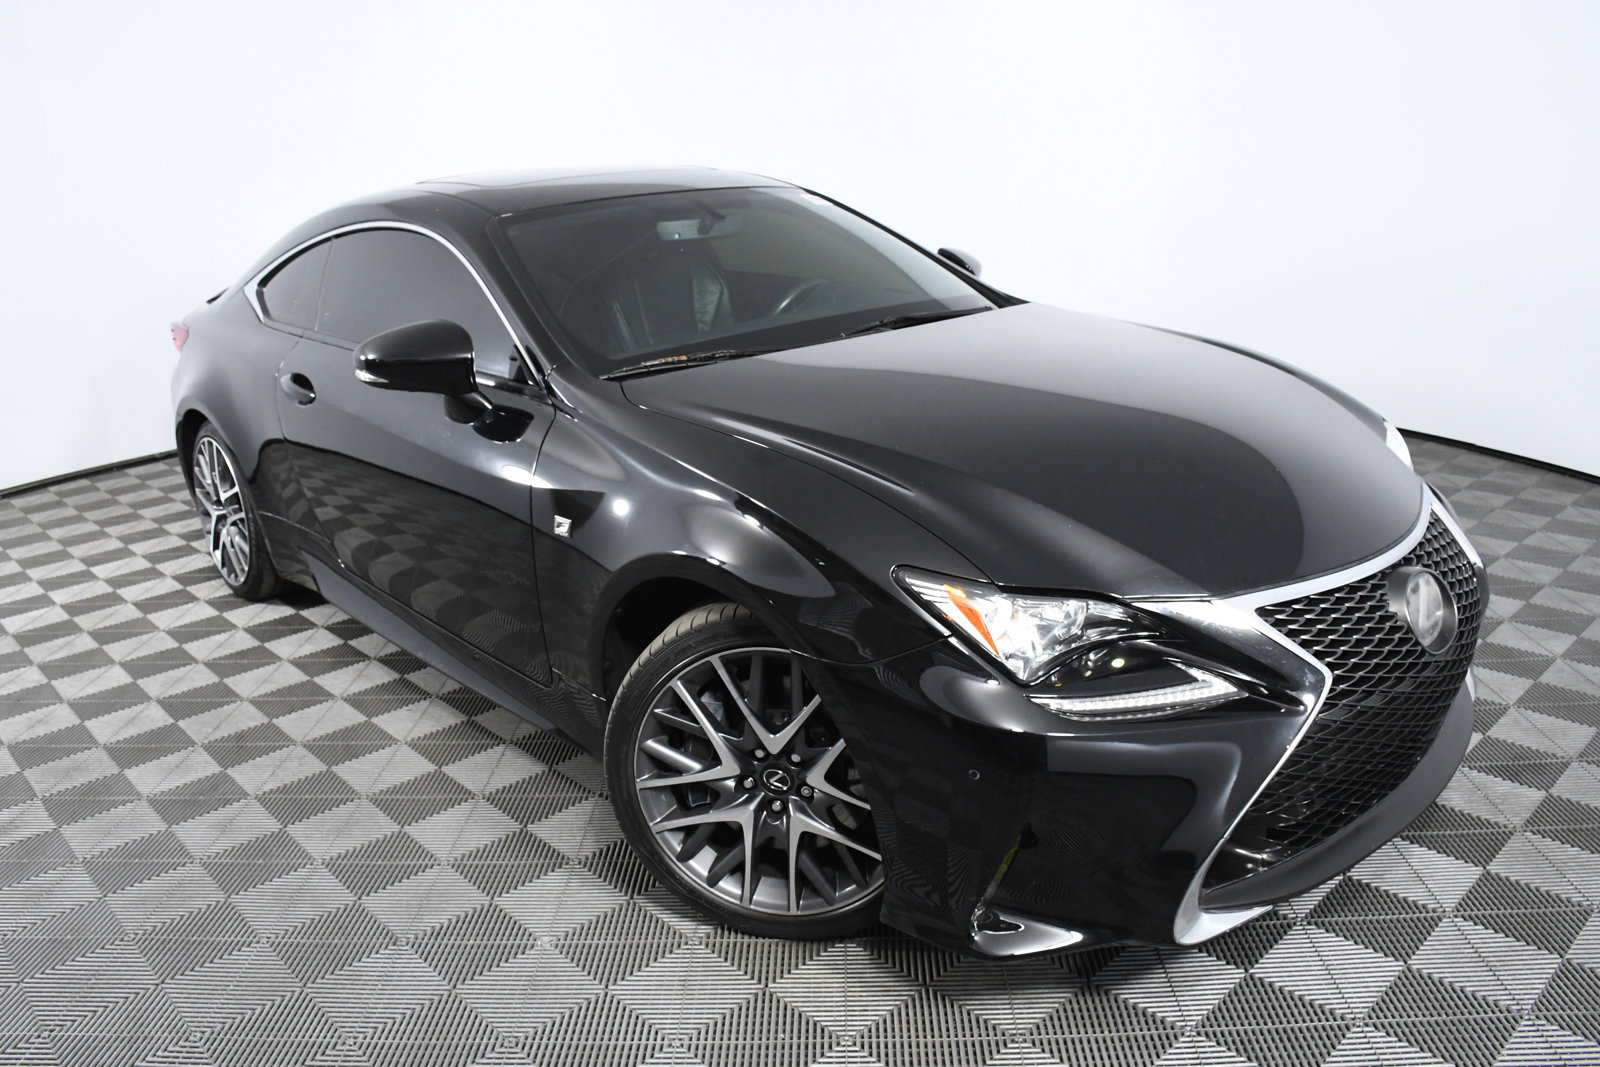 Pre-Owned 2017 Lexus RC 200t 2dr Car in Palmetto Bay #5007303 | HGreg  Nissan Kendall